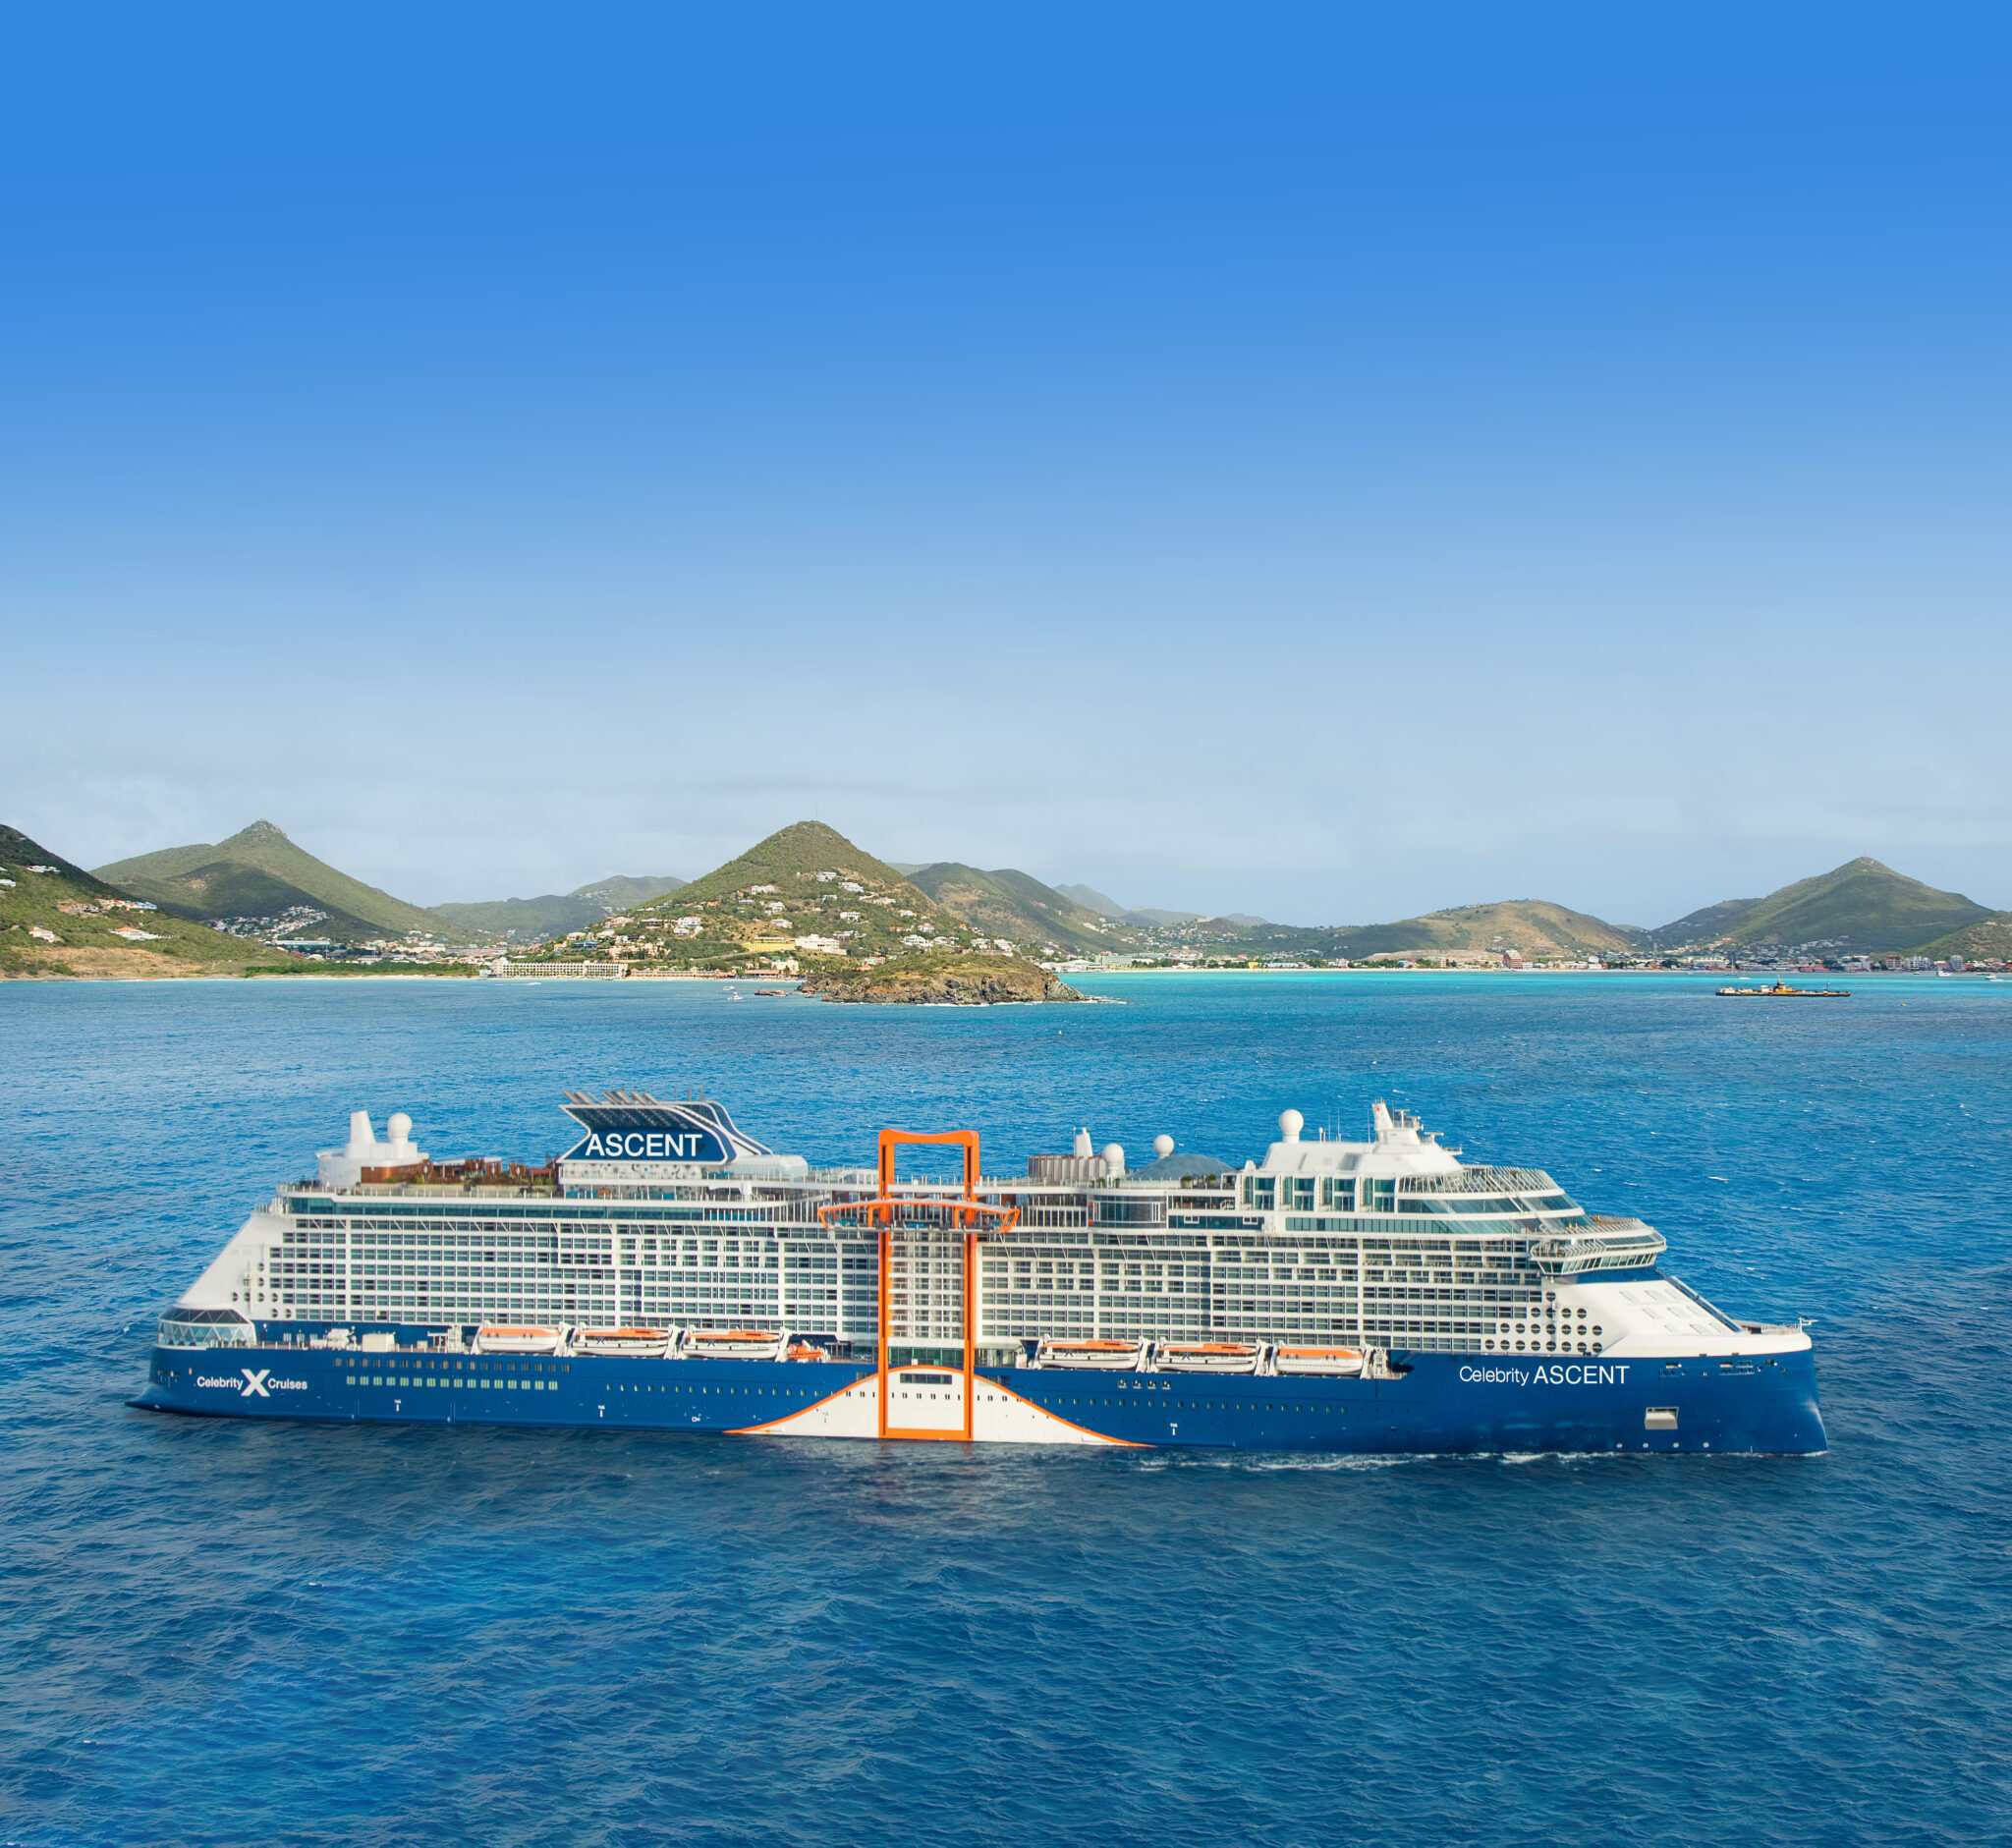 Celebrity Ascent in the Caribbean, Celebrity Cruises' newest ship launching Fall 2023